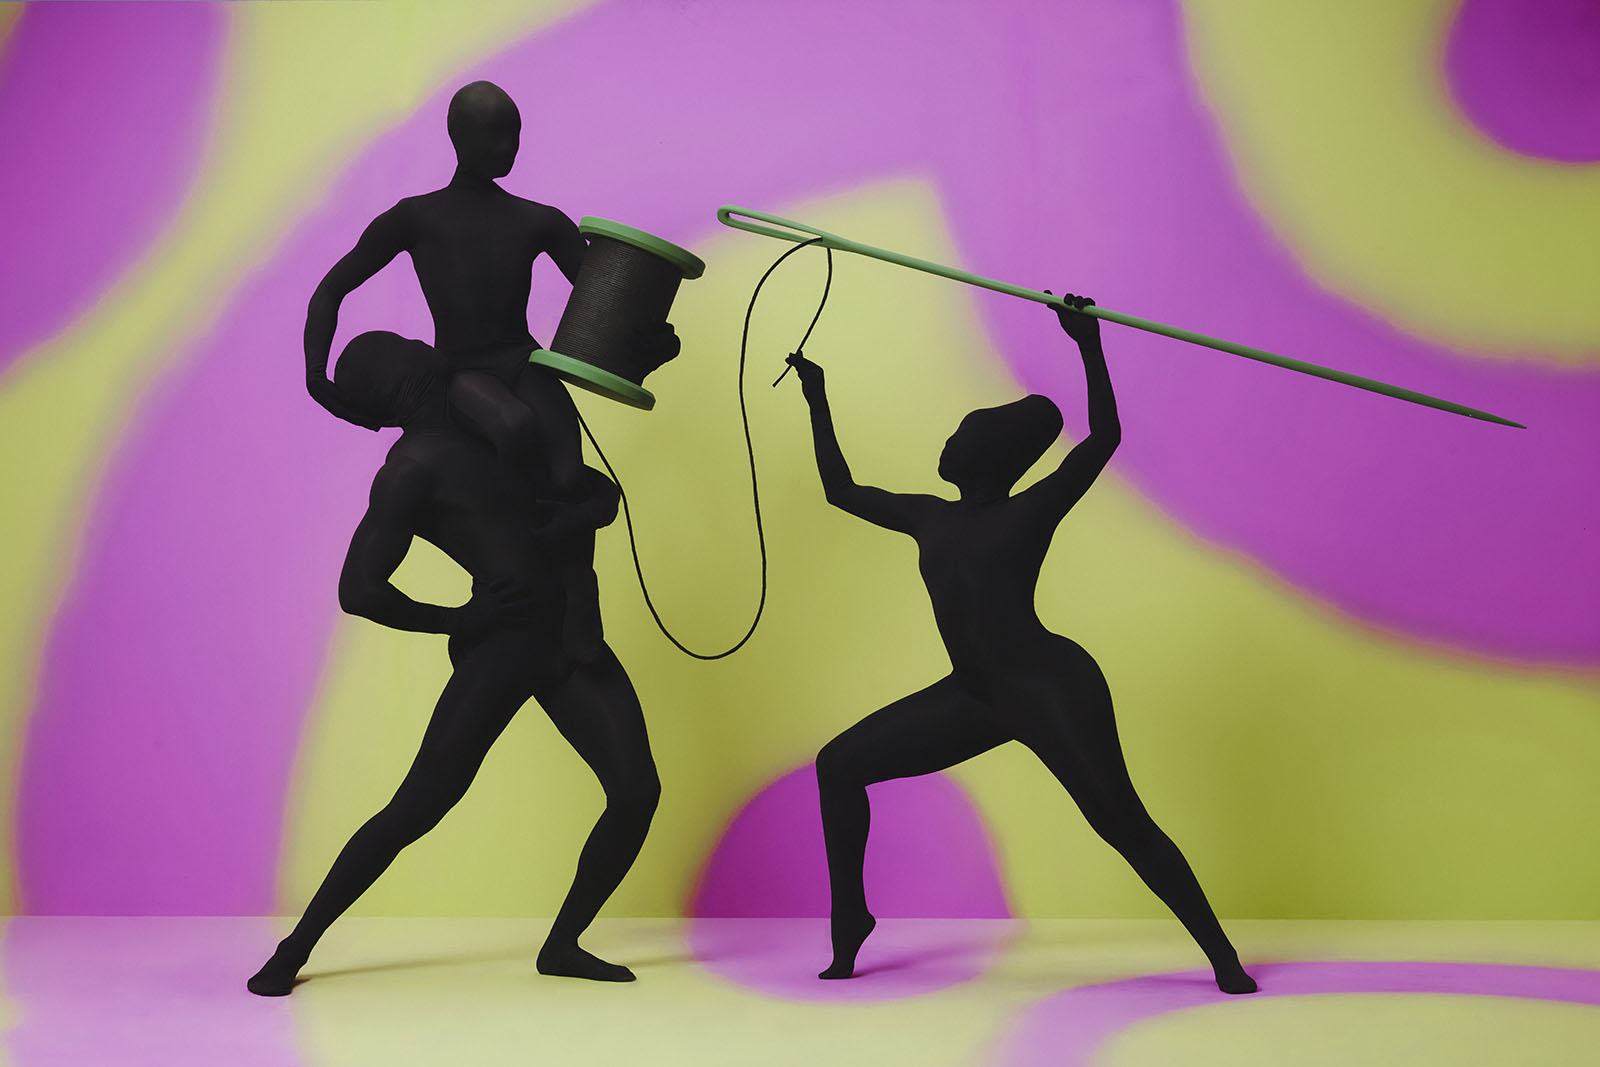 Three silhouettes pose holding a giant spool and giant sewing needle.